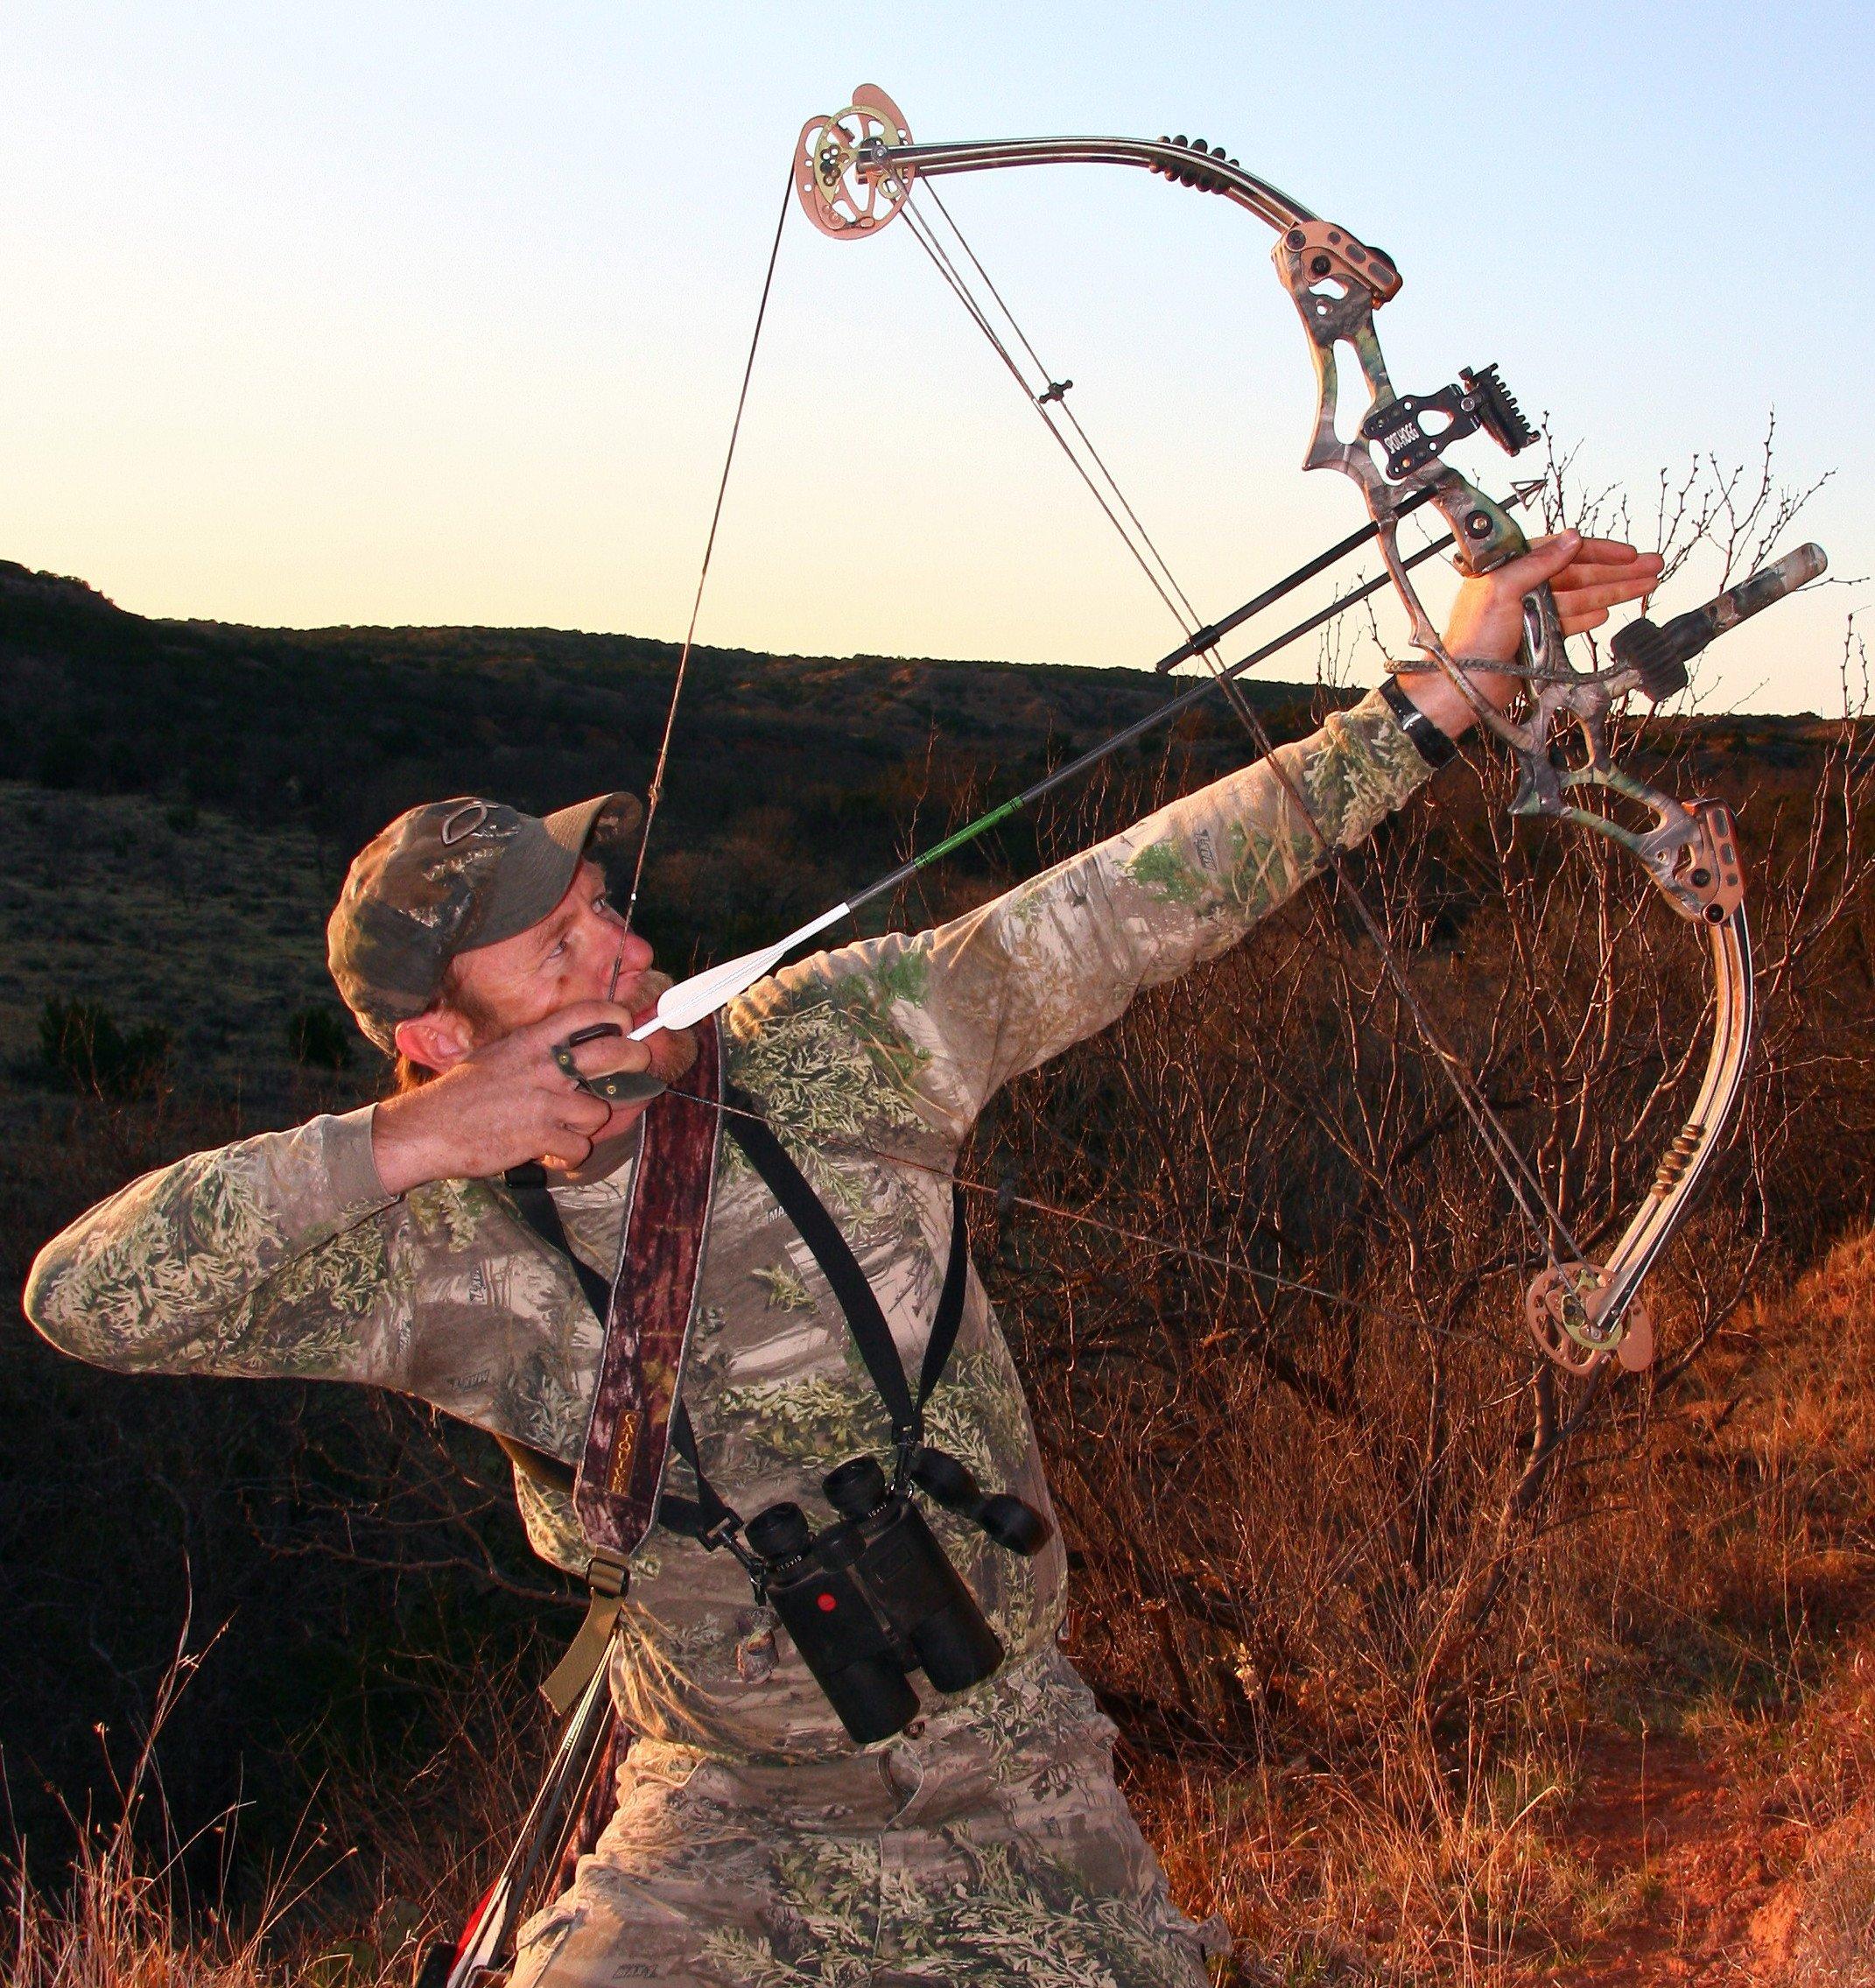 Shooting with fingers can be an advantage in many bowhunting situations. (Patrick Meitin photo)